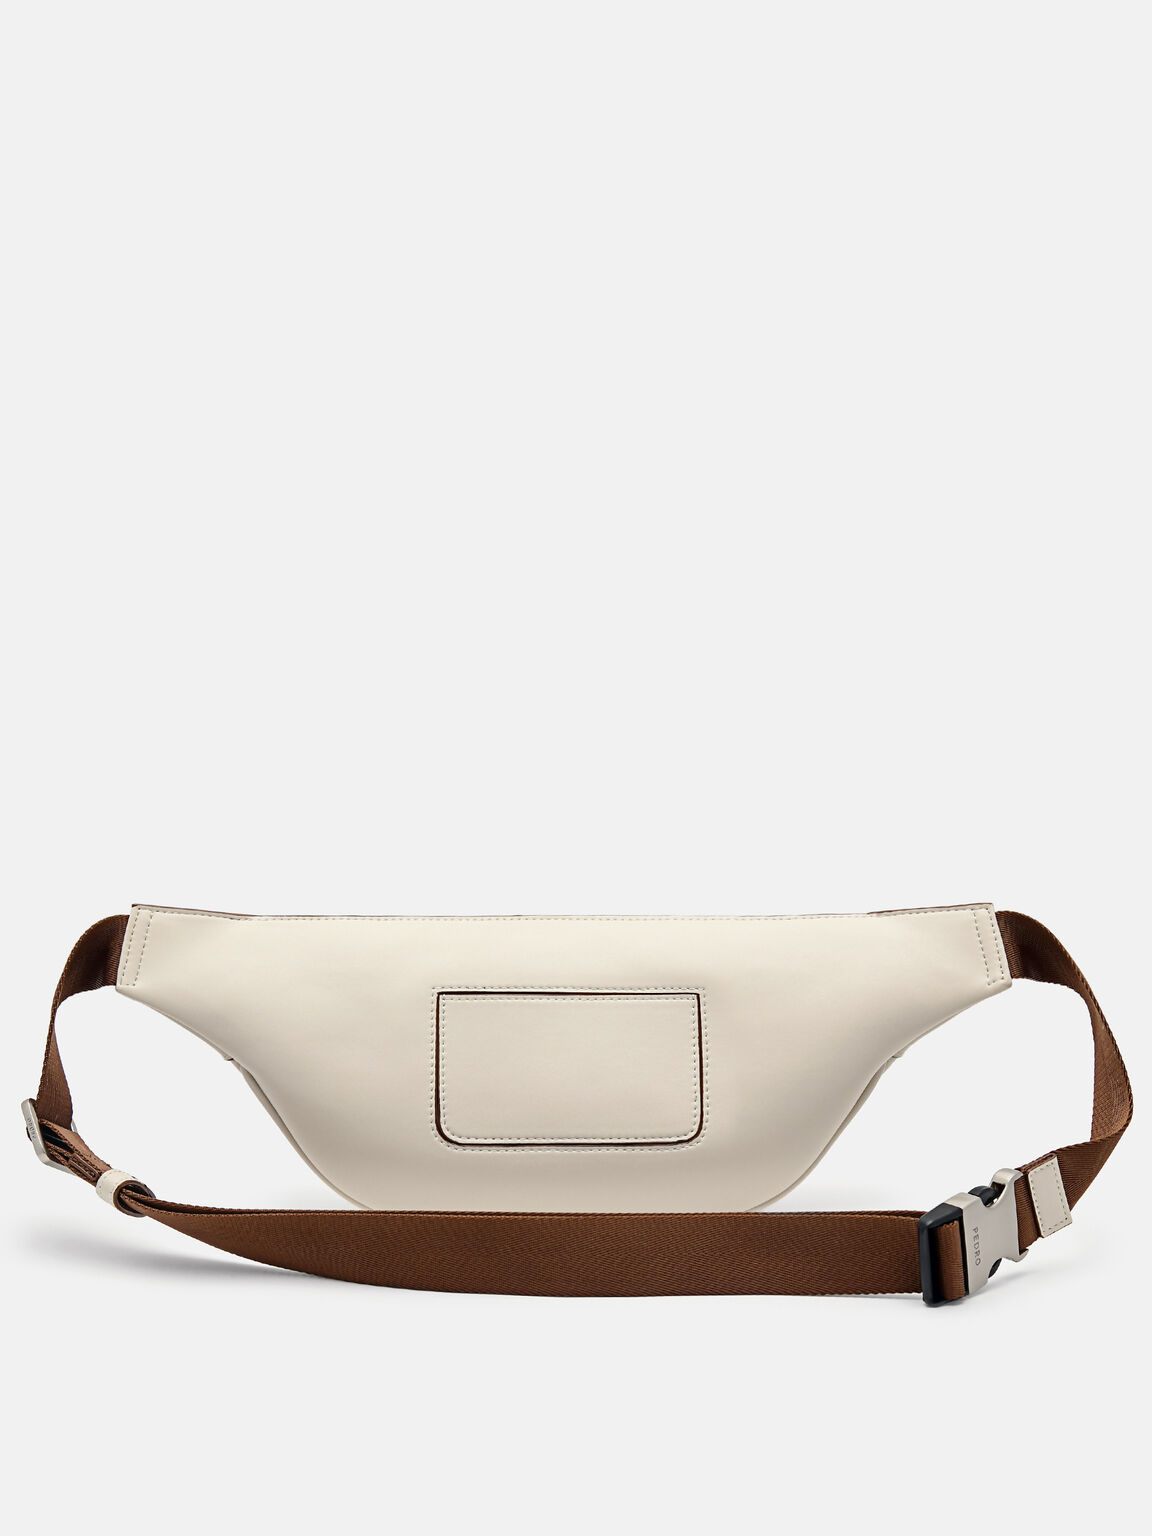 Fred Sling Pouch, Beige